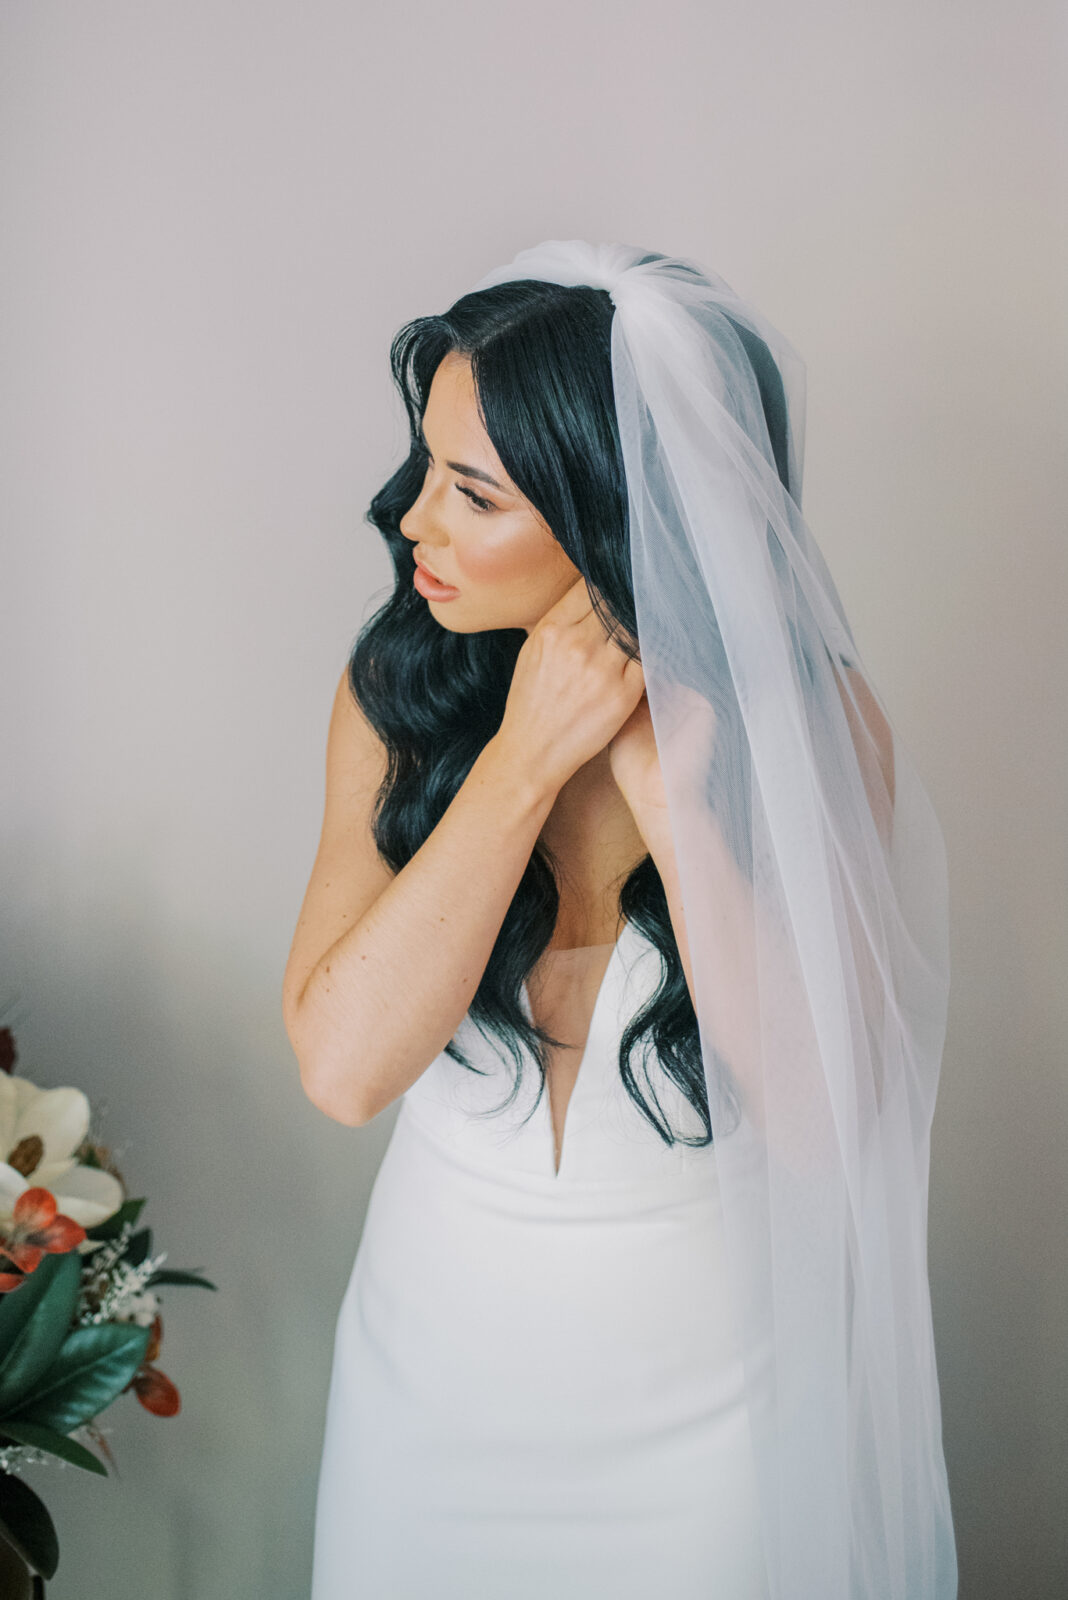 chic bride getting ready photos, wearing veil and putting in earrings, long loose curls bridal hairstyle with veil and middle part